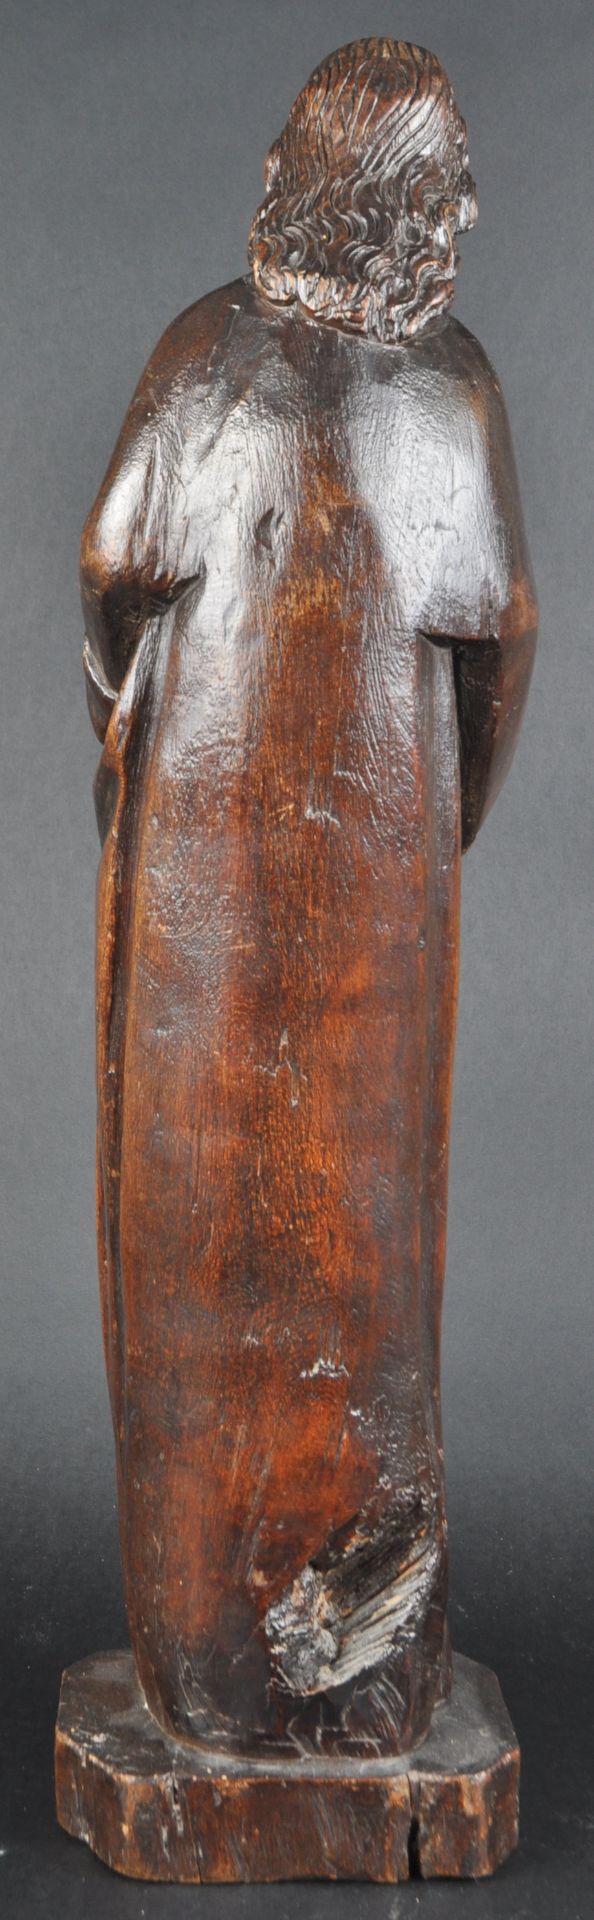 19TH CENTURY MAHOGANY CARVED STATUE OF A SAINT - Image 5 of 6